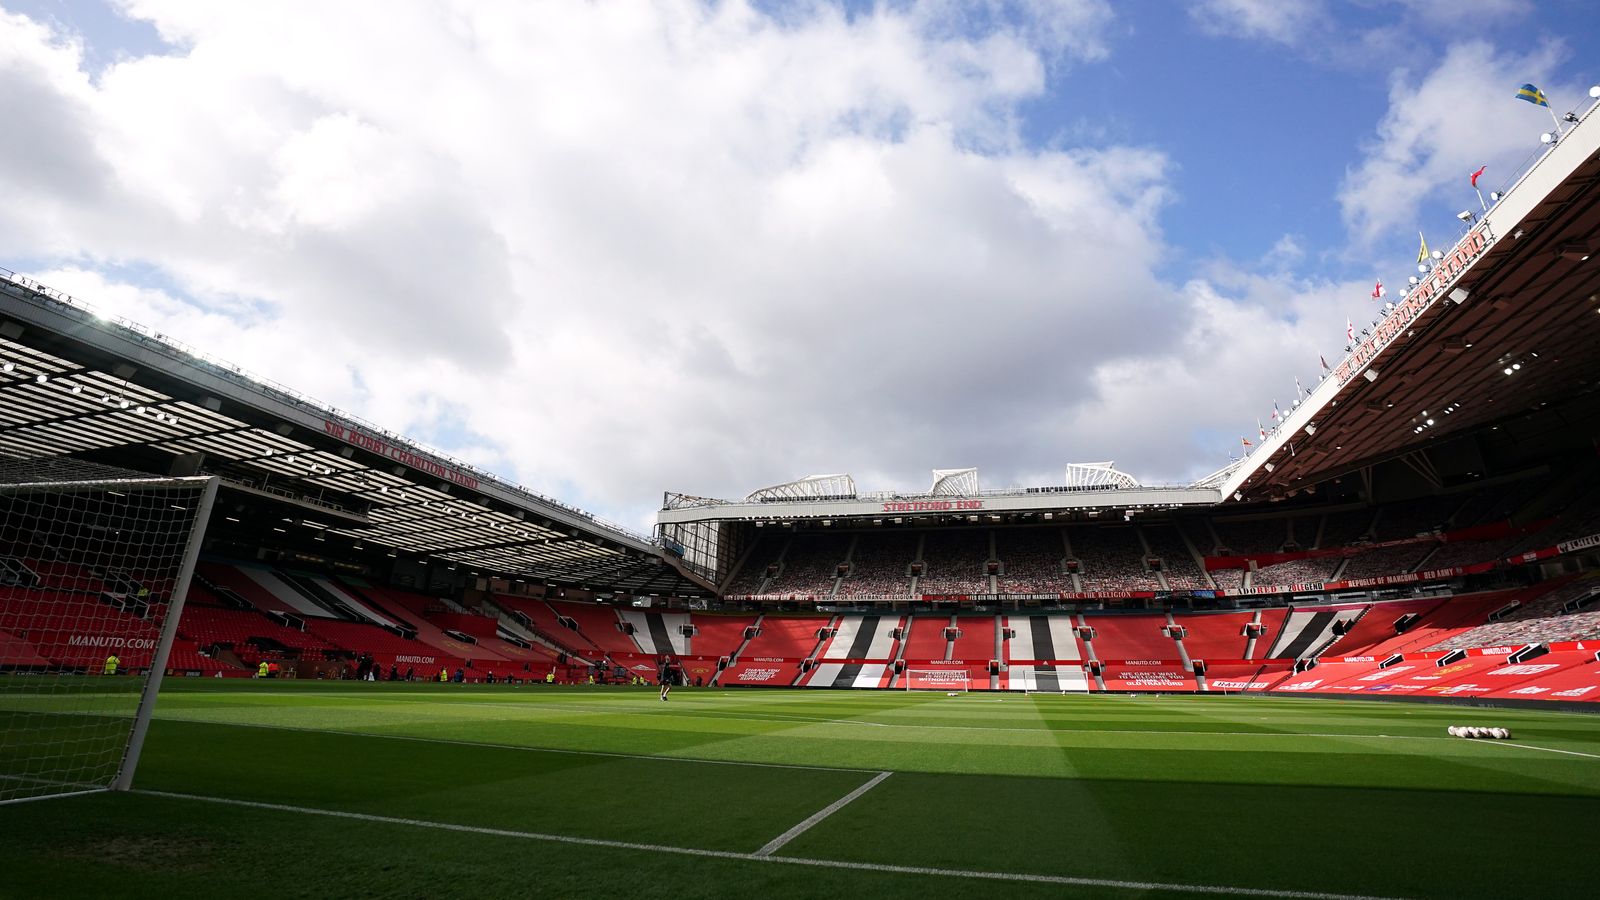 Manchester United hit by 'small number' of Covid-19 cases among players and staff